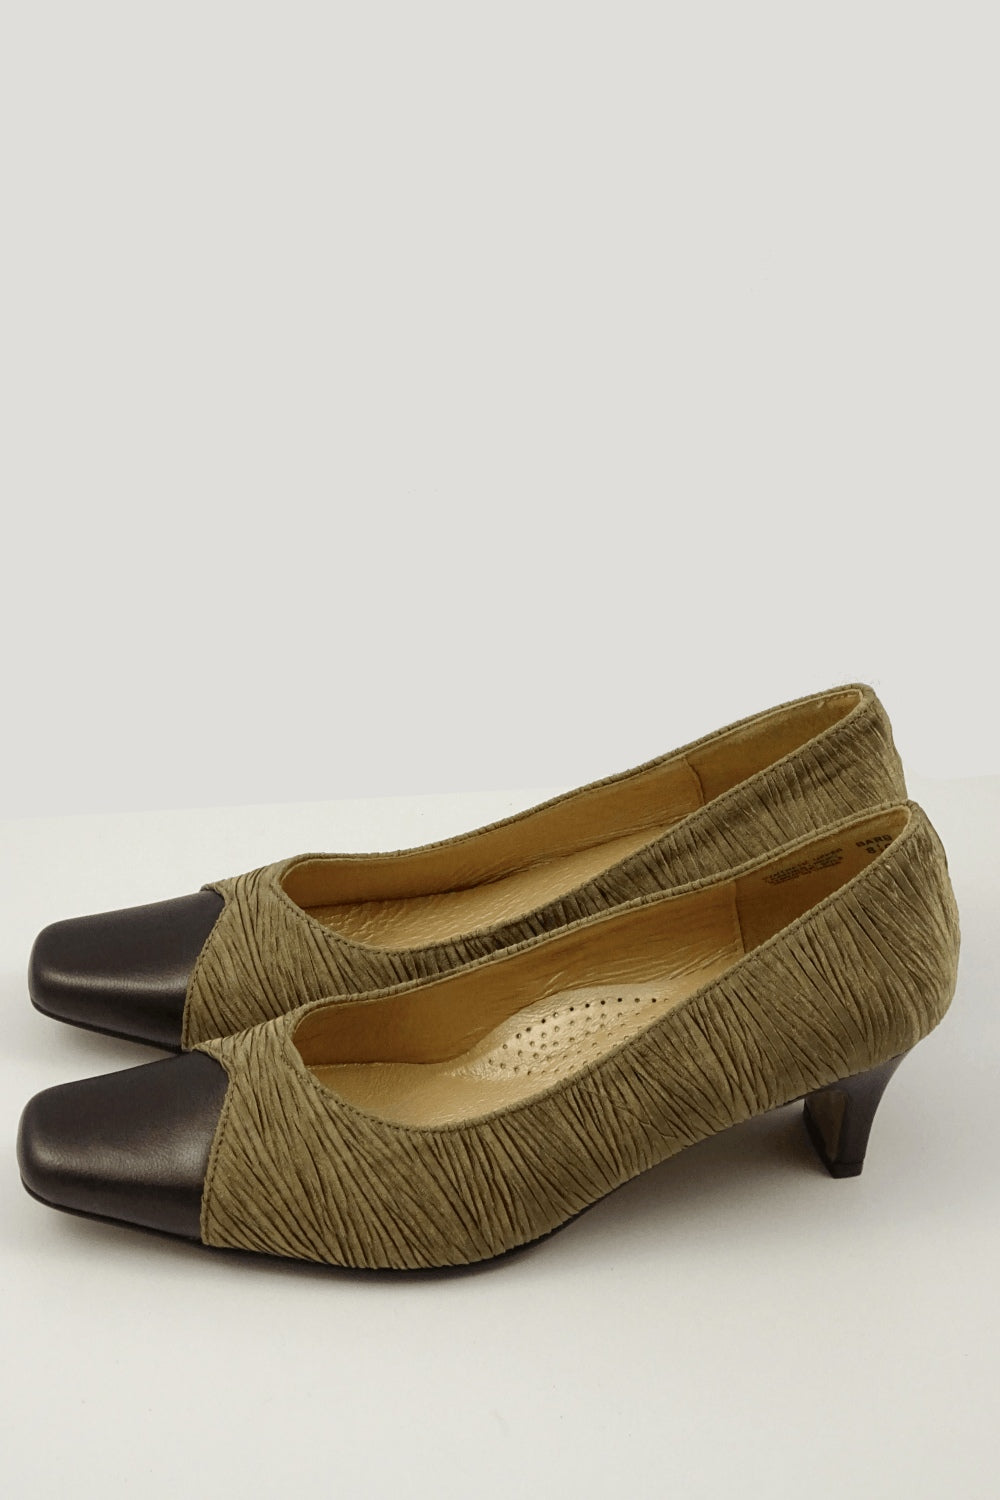 Allino Gold And Brown Heels  8.5